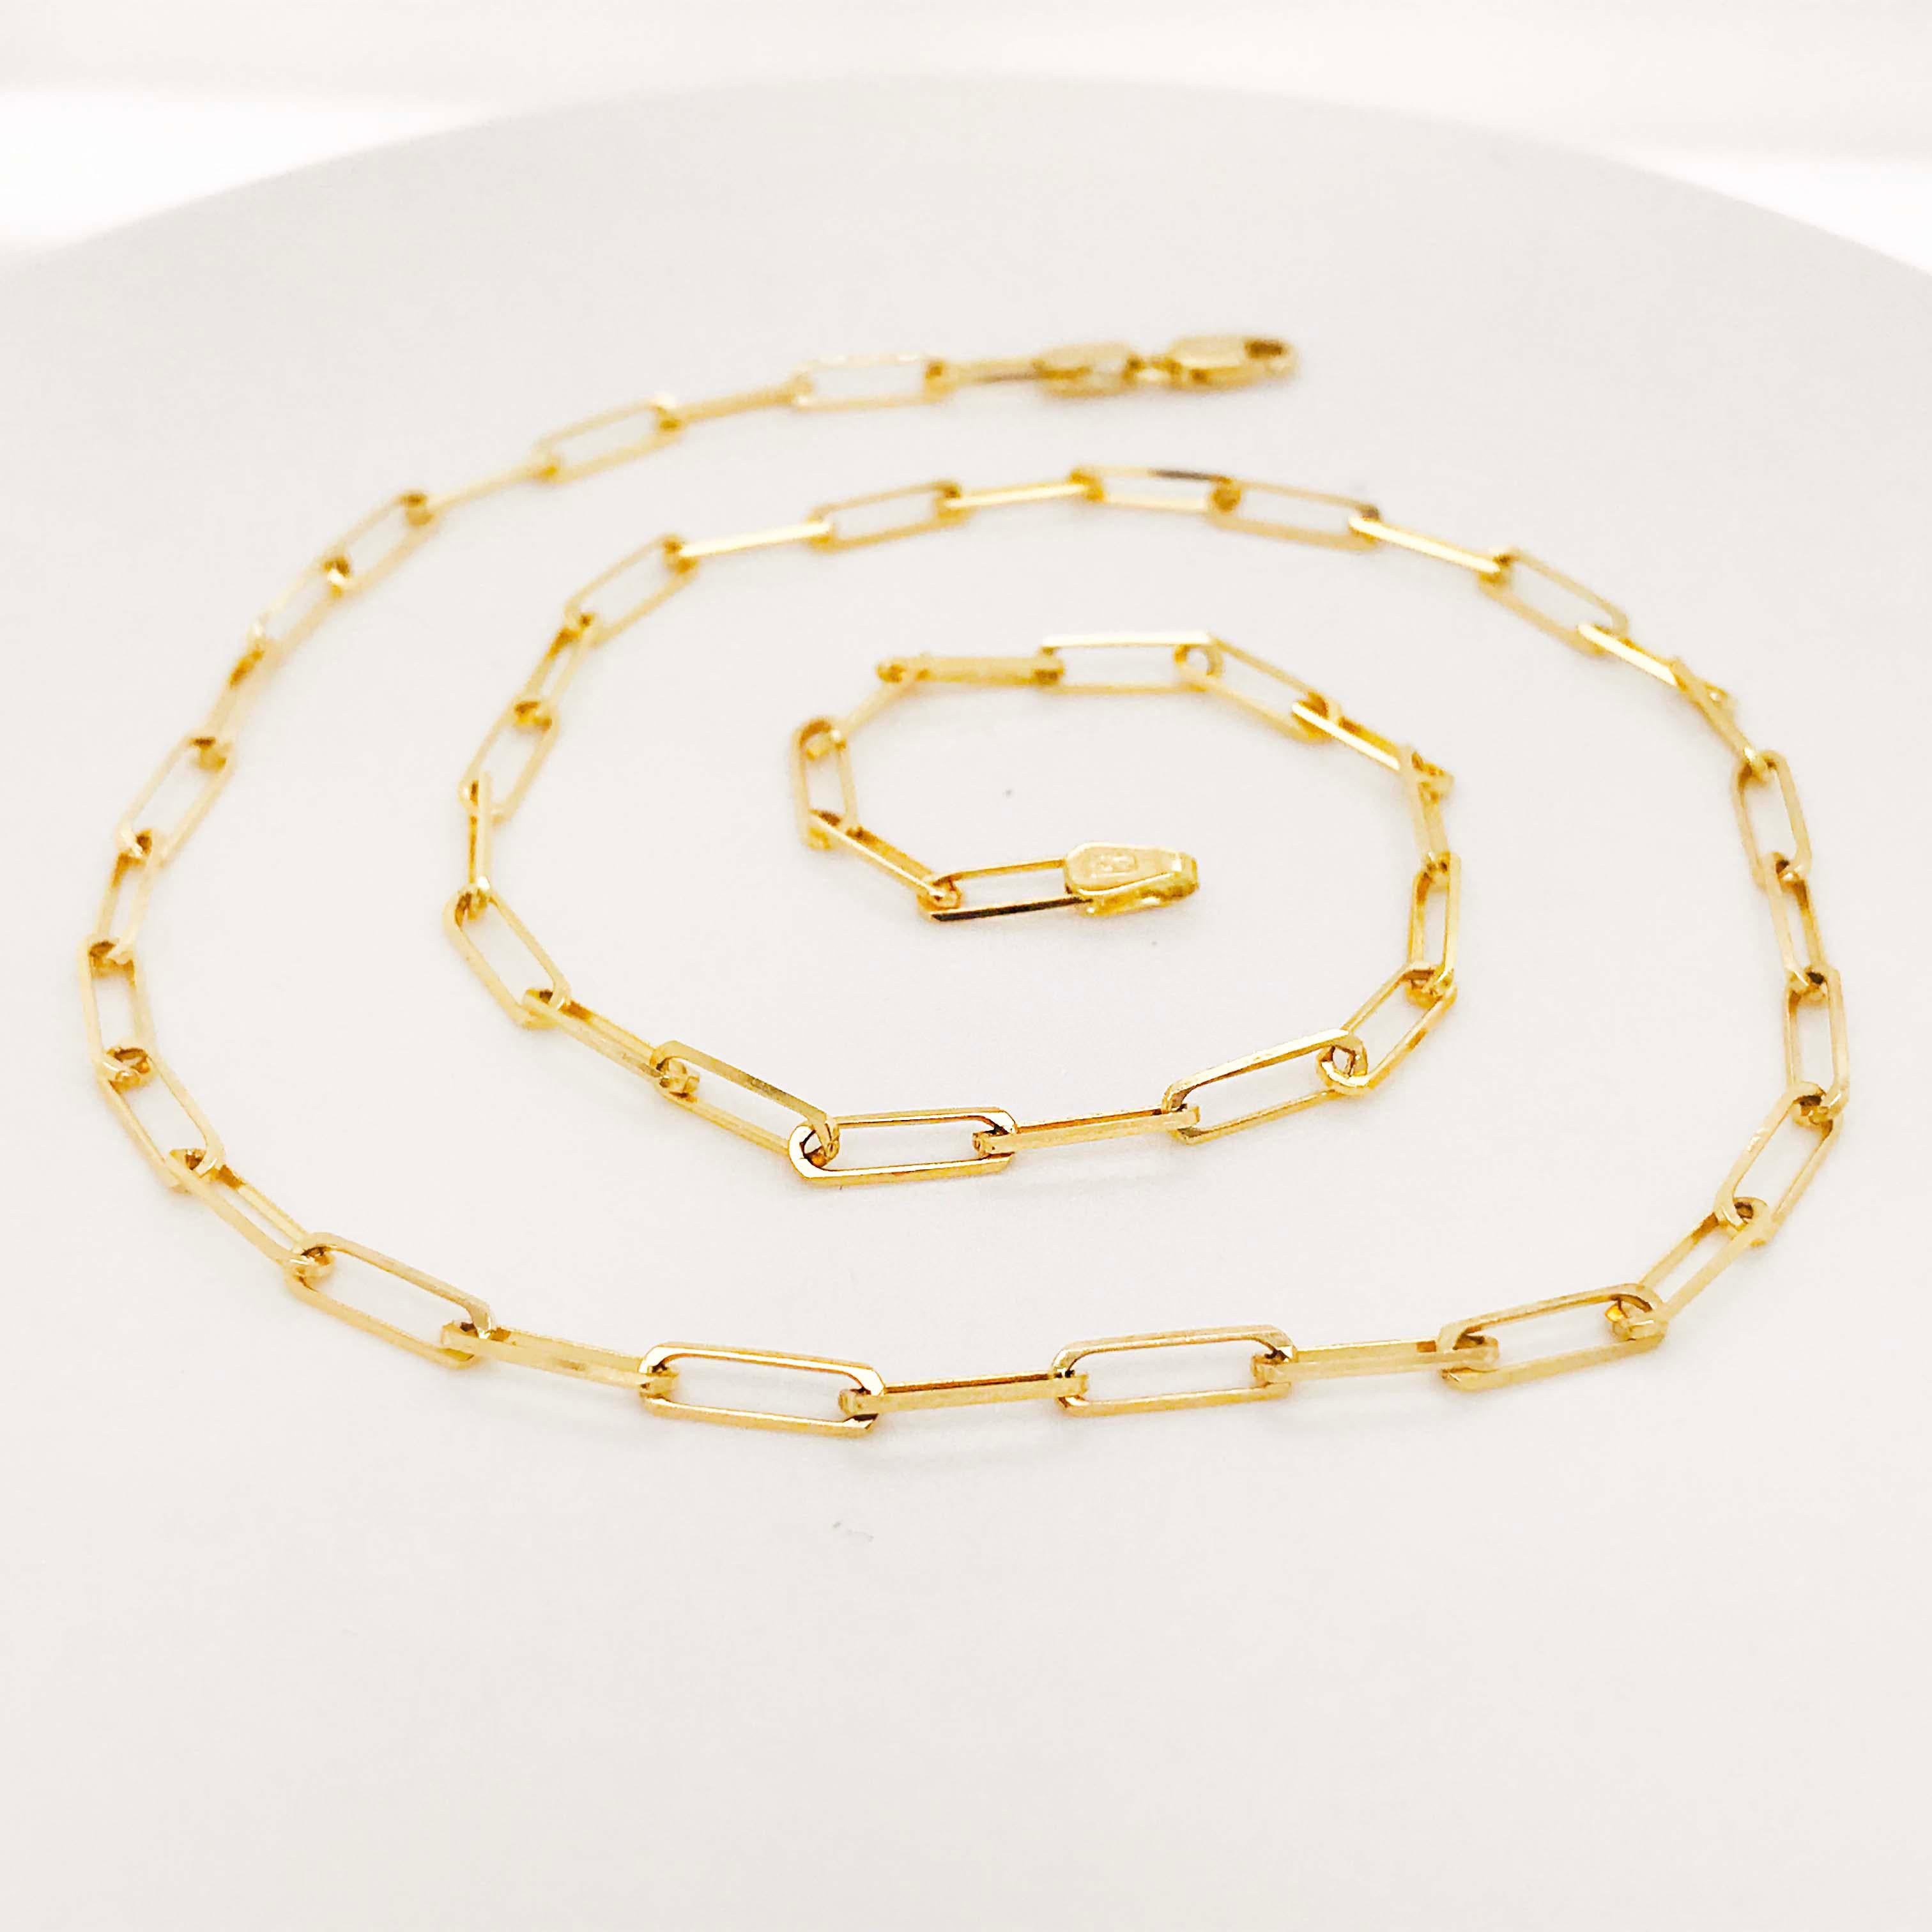 2020 FASHION JEWELRY - the latest fine jewelry fad! 
This gorgeous, fashionable paperclip link chain is a handmade paperclip large link chain necklace. With each link handmade in 14k yellow gold. The links are squared and measure 2.8mm wide and